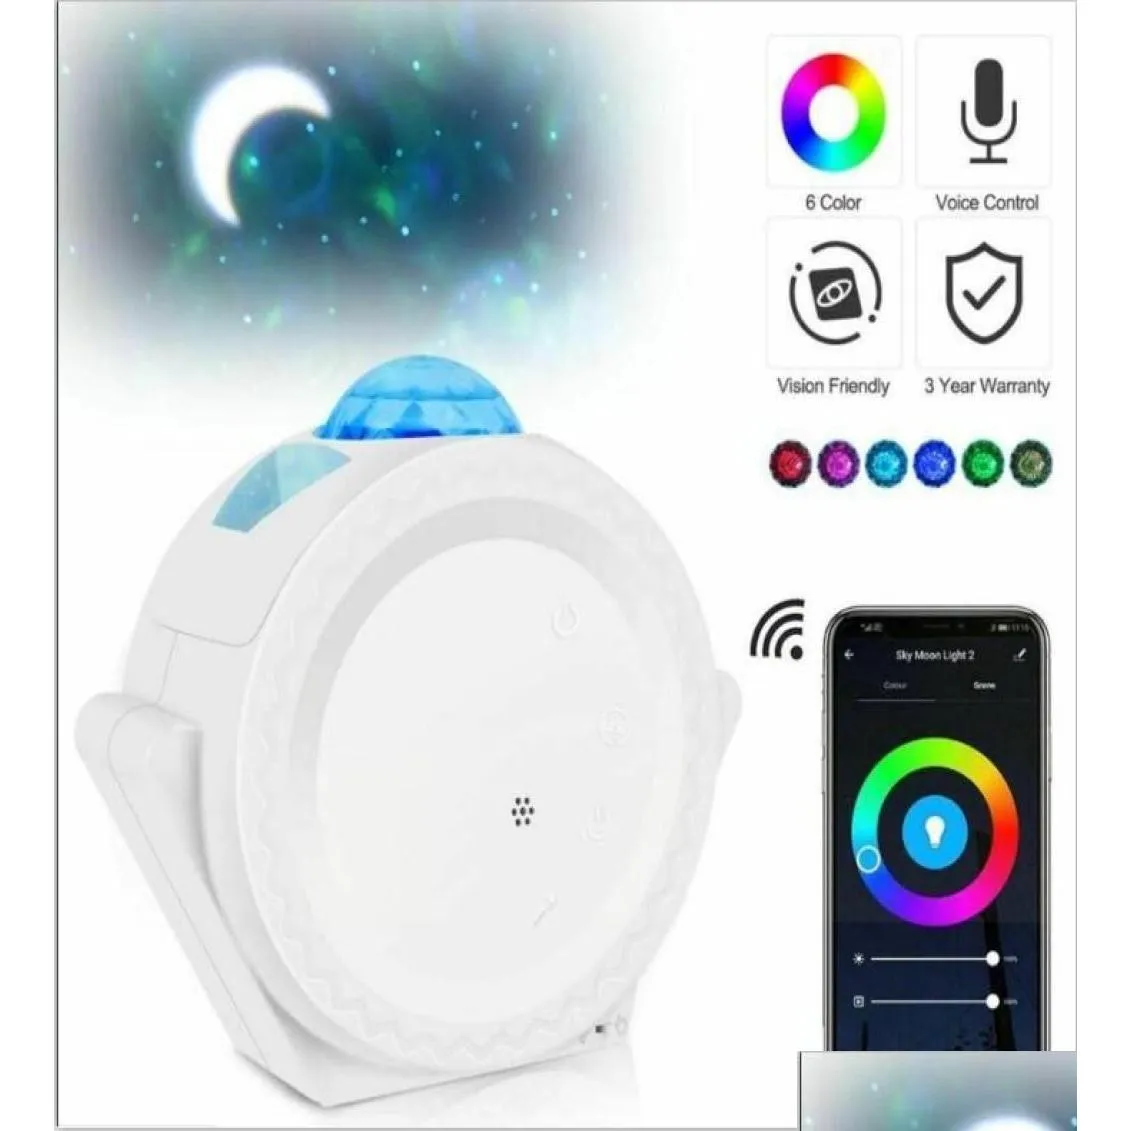 Led Gadget Est 3 In 1 Projector Light Universe Starry Creative Night For Party Home Fast 9914250 Drop Delivery Electronics Gadgets Dh5N4